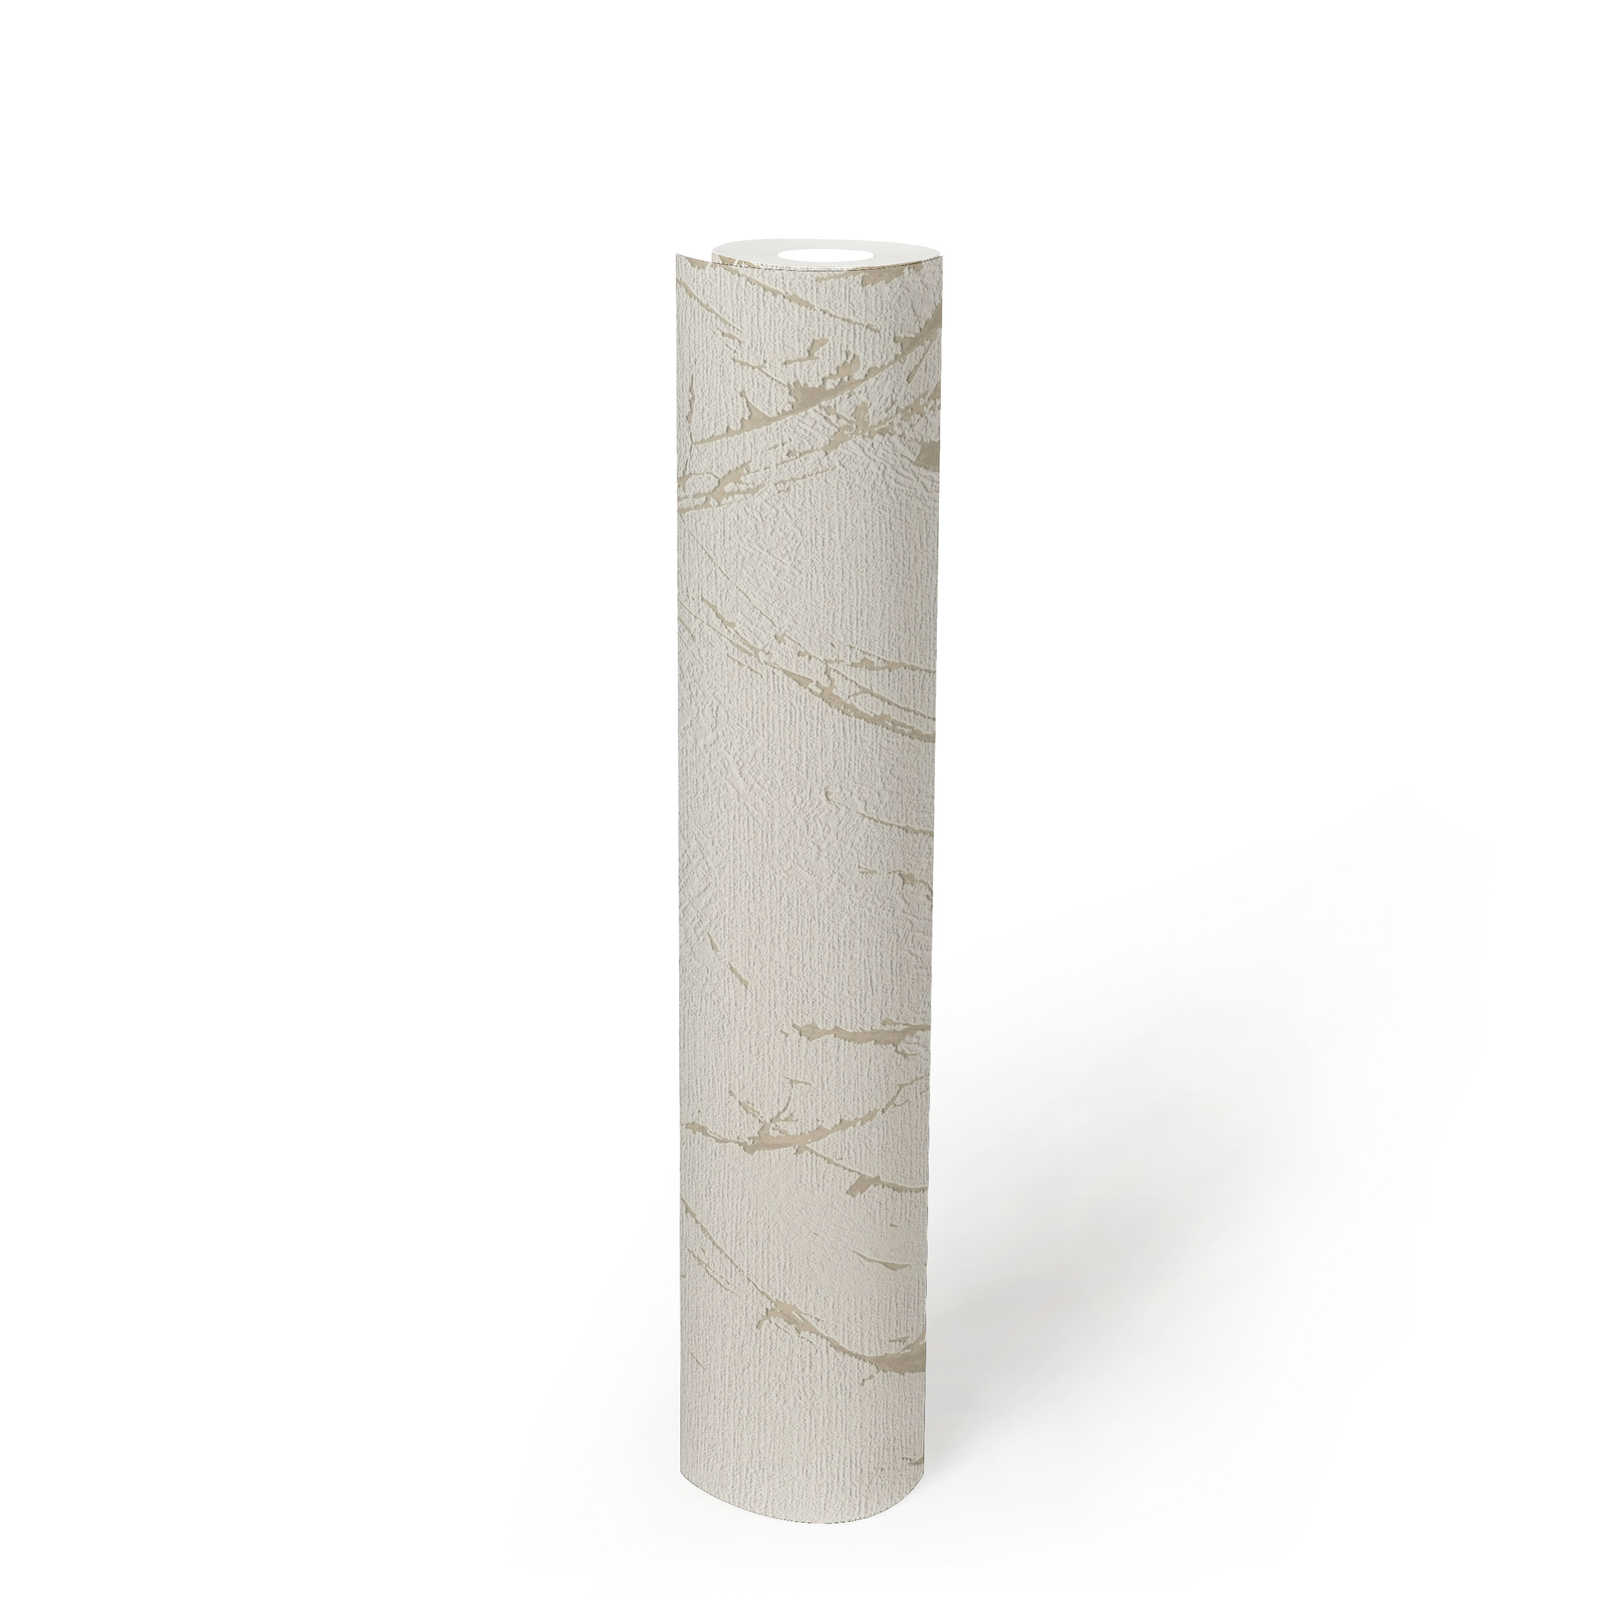             Wallpaper with plaster look pattern shimmering gold - white, champagne, metallic
        